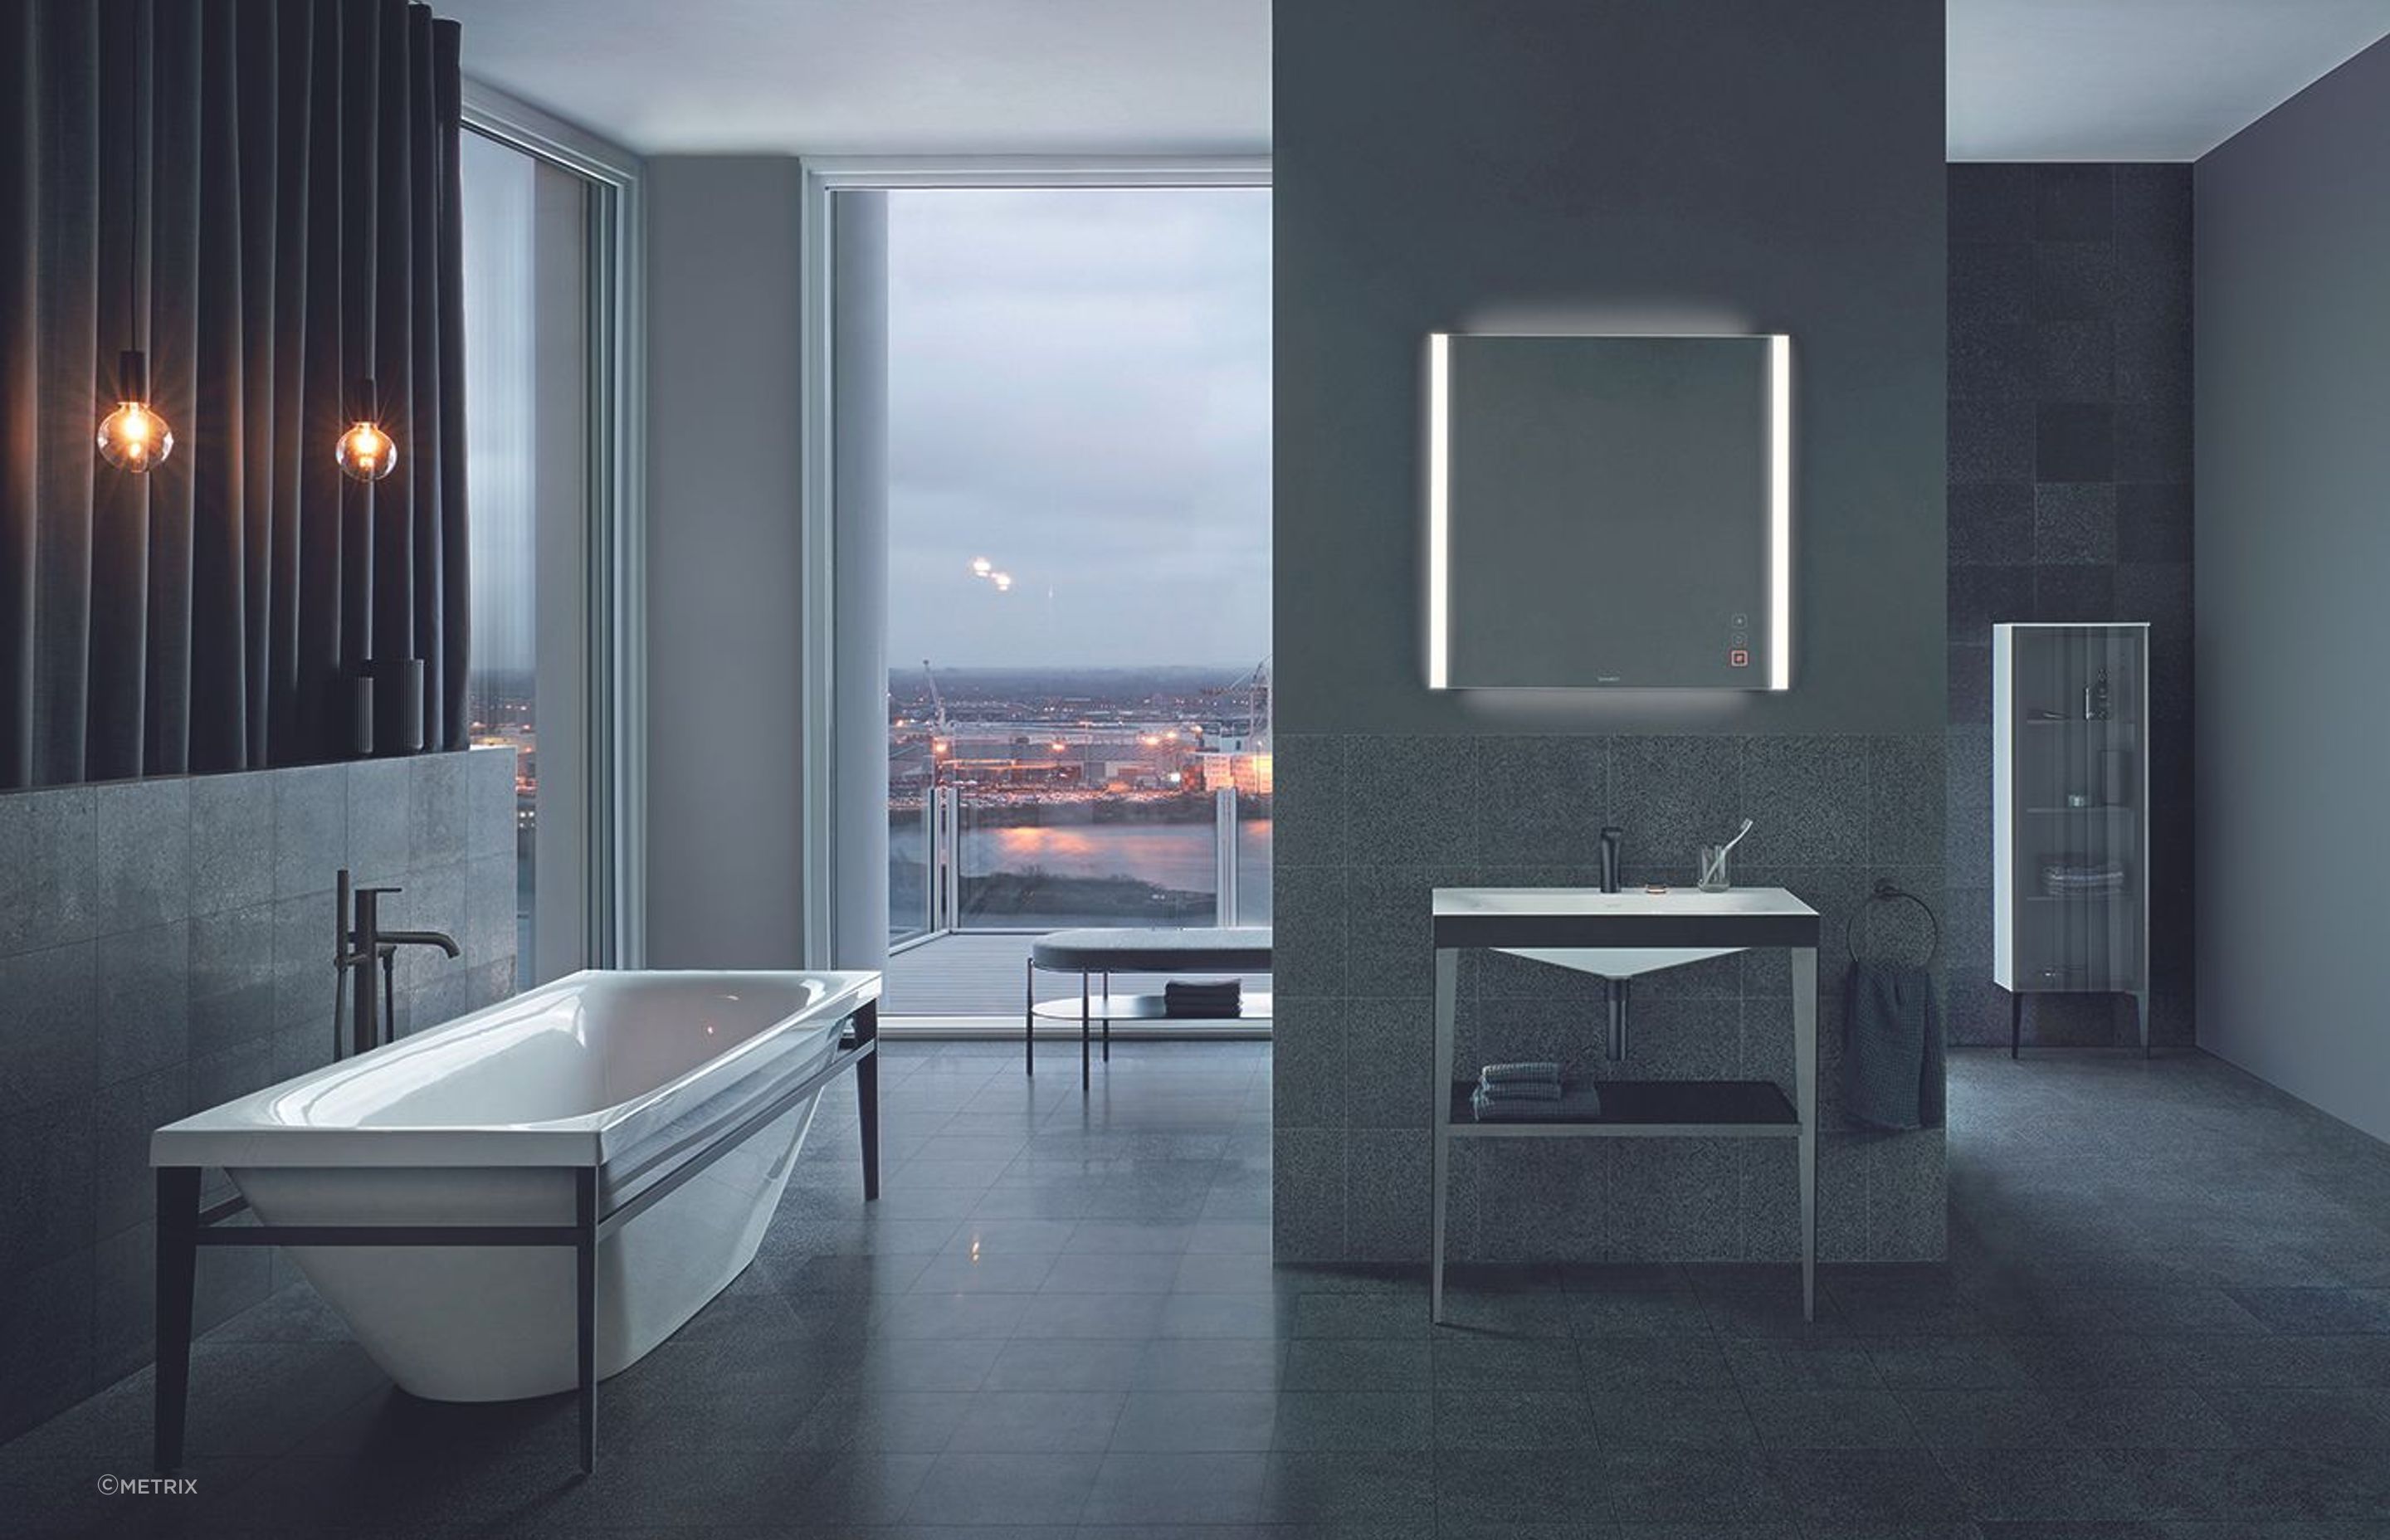 Planned to design perfection featuring the Viu/XViu Bathroom Collection by Duravit